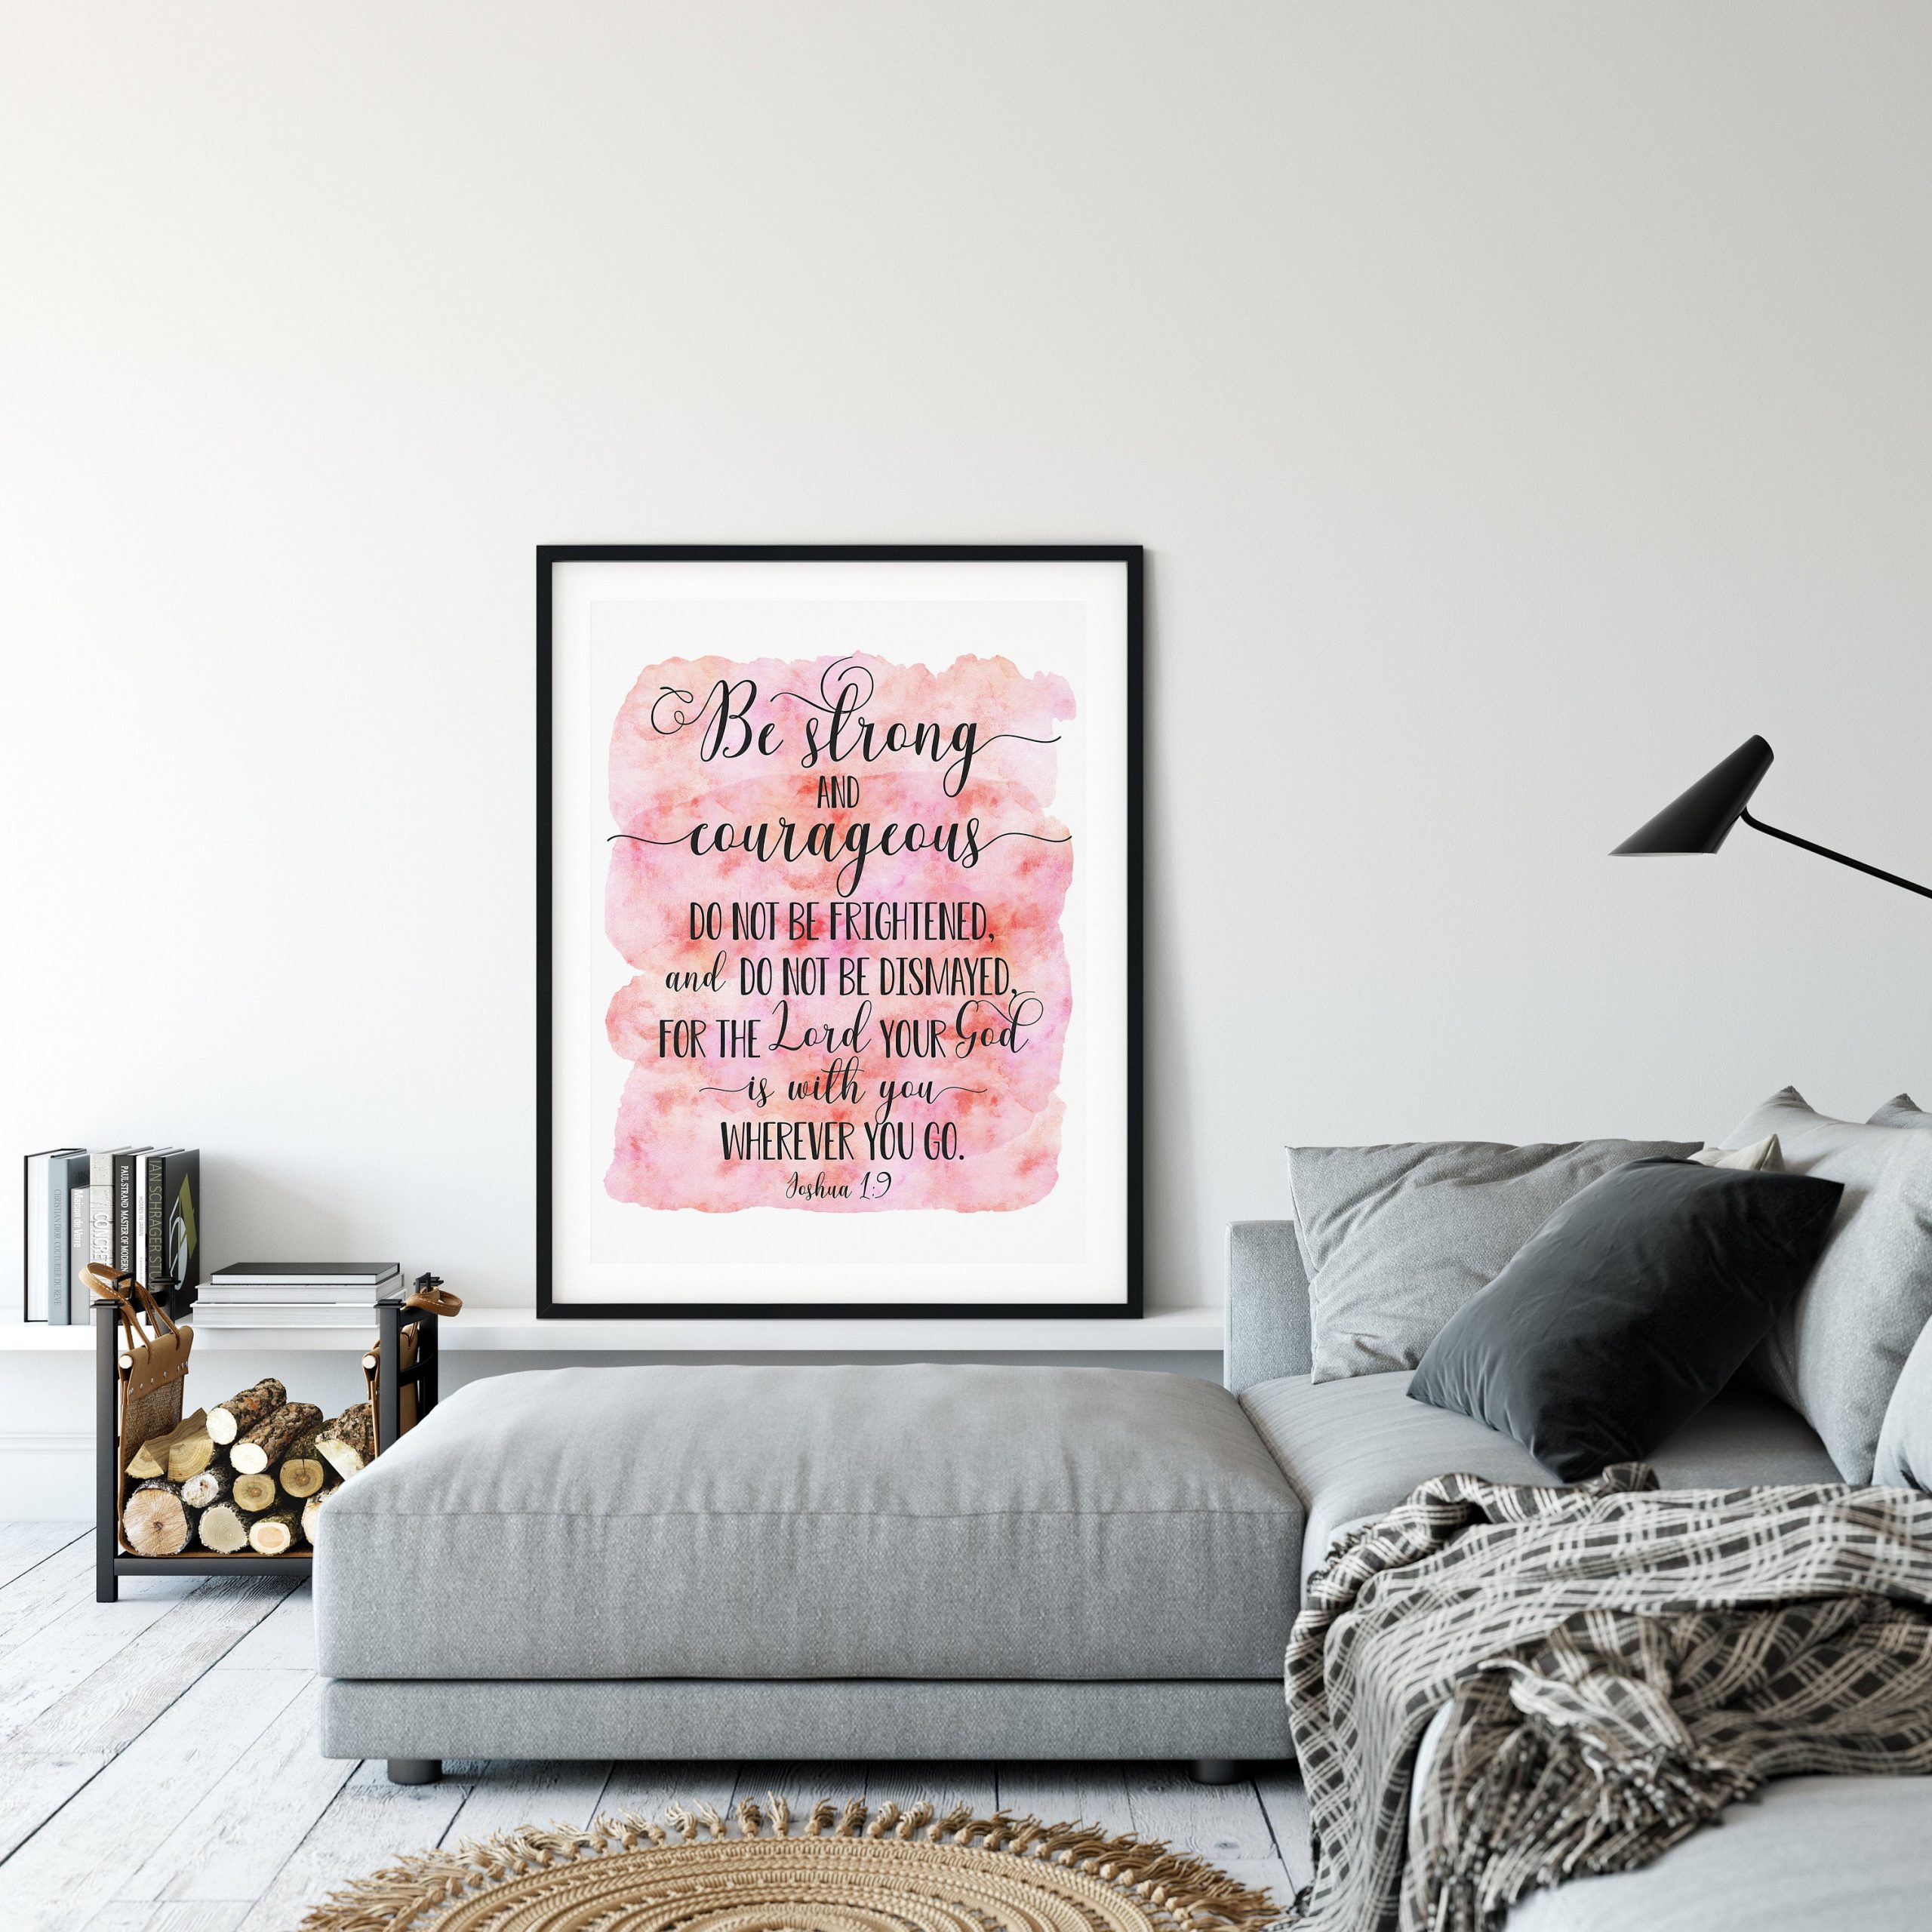 Be Strong And Courageous, Joshua 1:9, Bible Verse Printable Wall Art, Nursery Bible Quotes